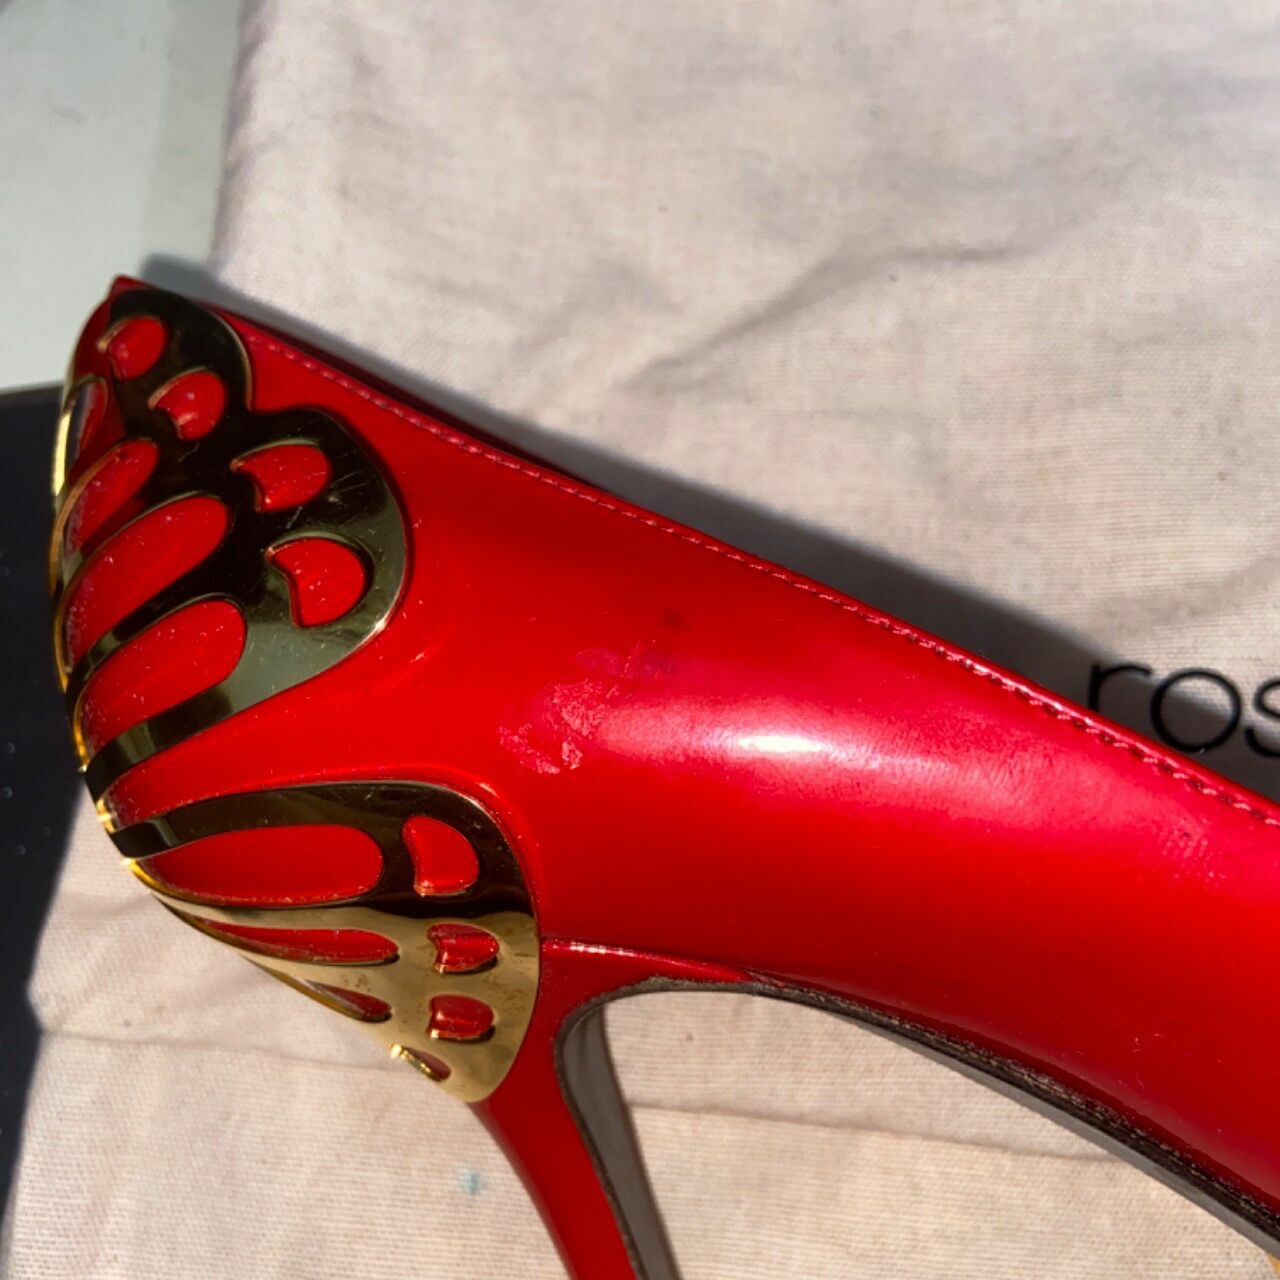 Sergio Rossi Gold & Red Heels